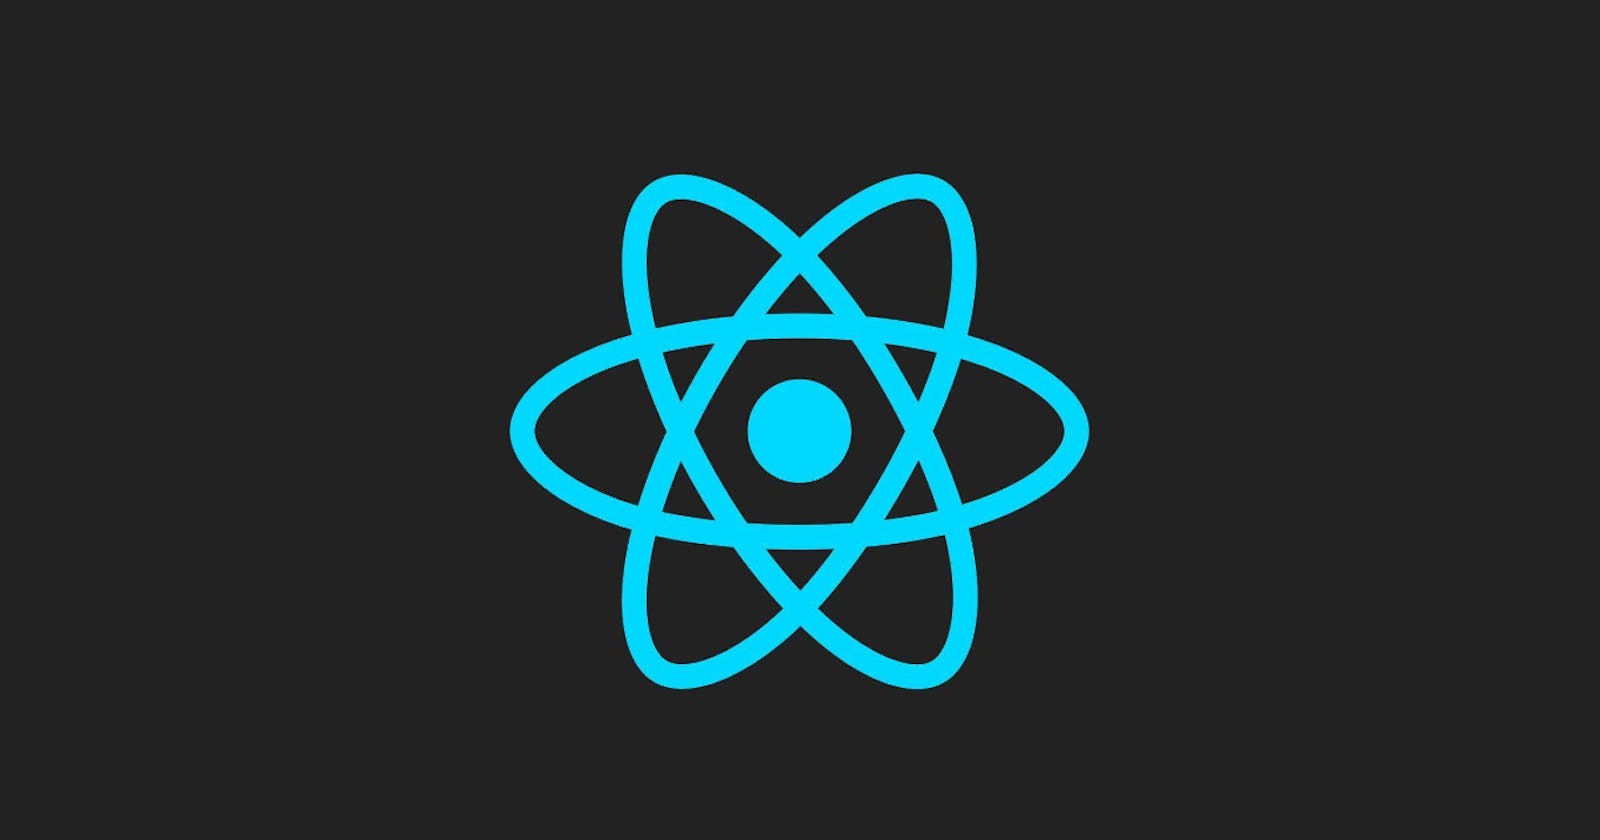 Here's a daily plan to help you learn React